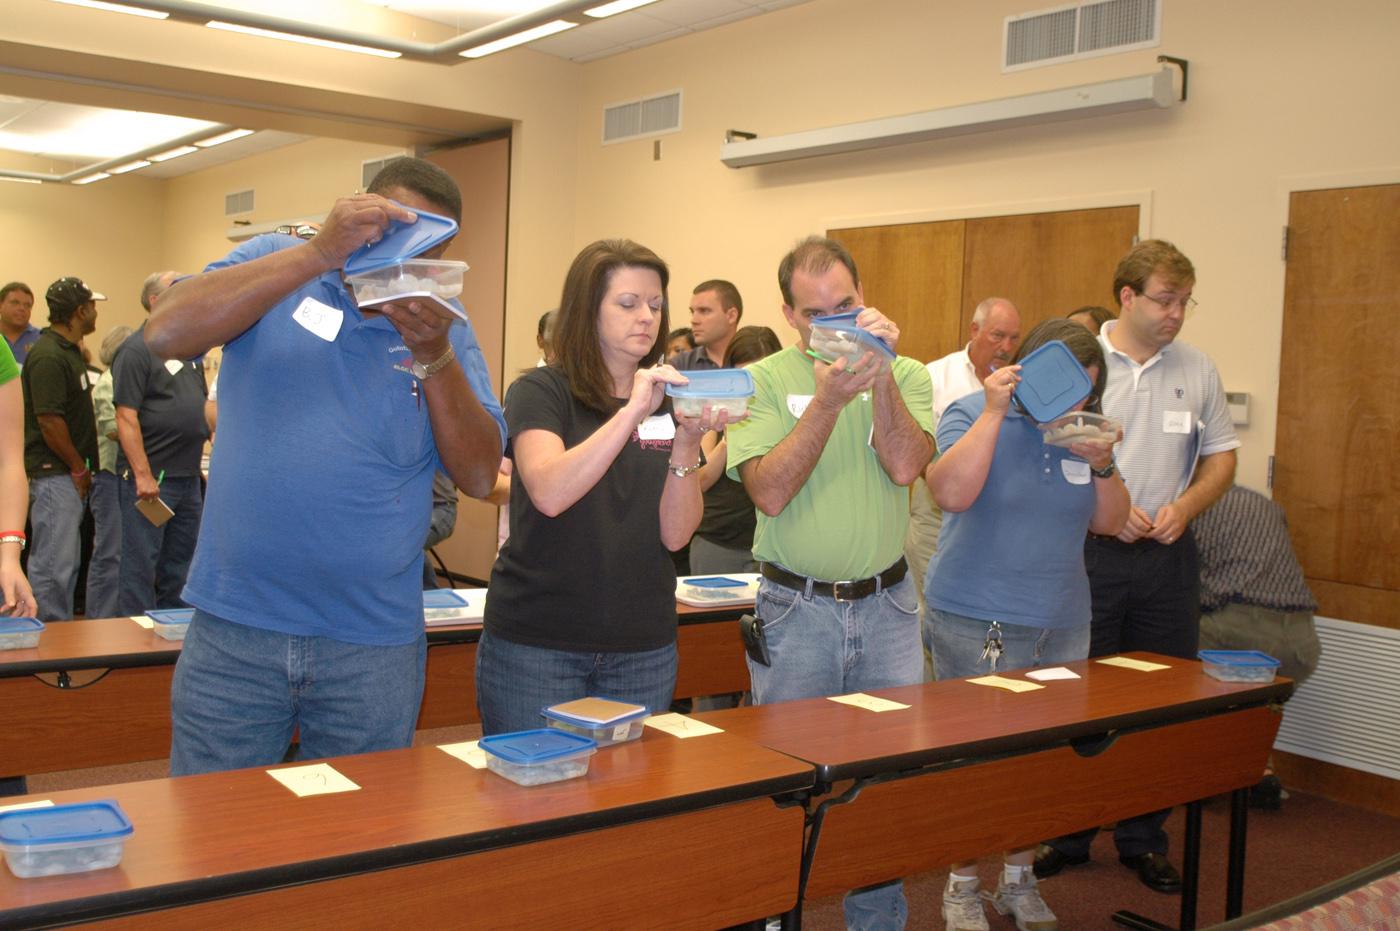 Participants in a recent Harvest from Open Waters training in Biloxi line up to sniff samples of shrimp and grouper spiked with oil in concentrations as low as 5 parts per million and less. (Photo by Karen Templeton)